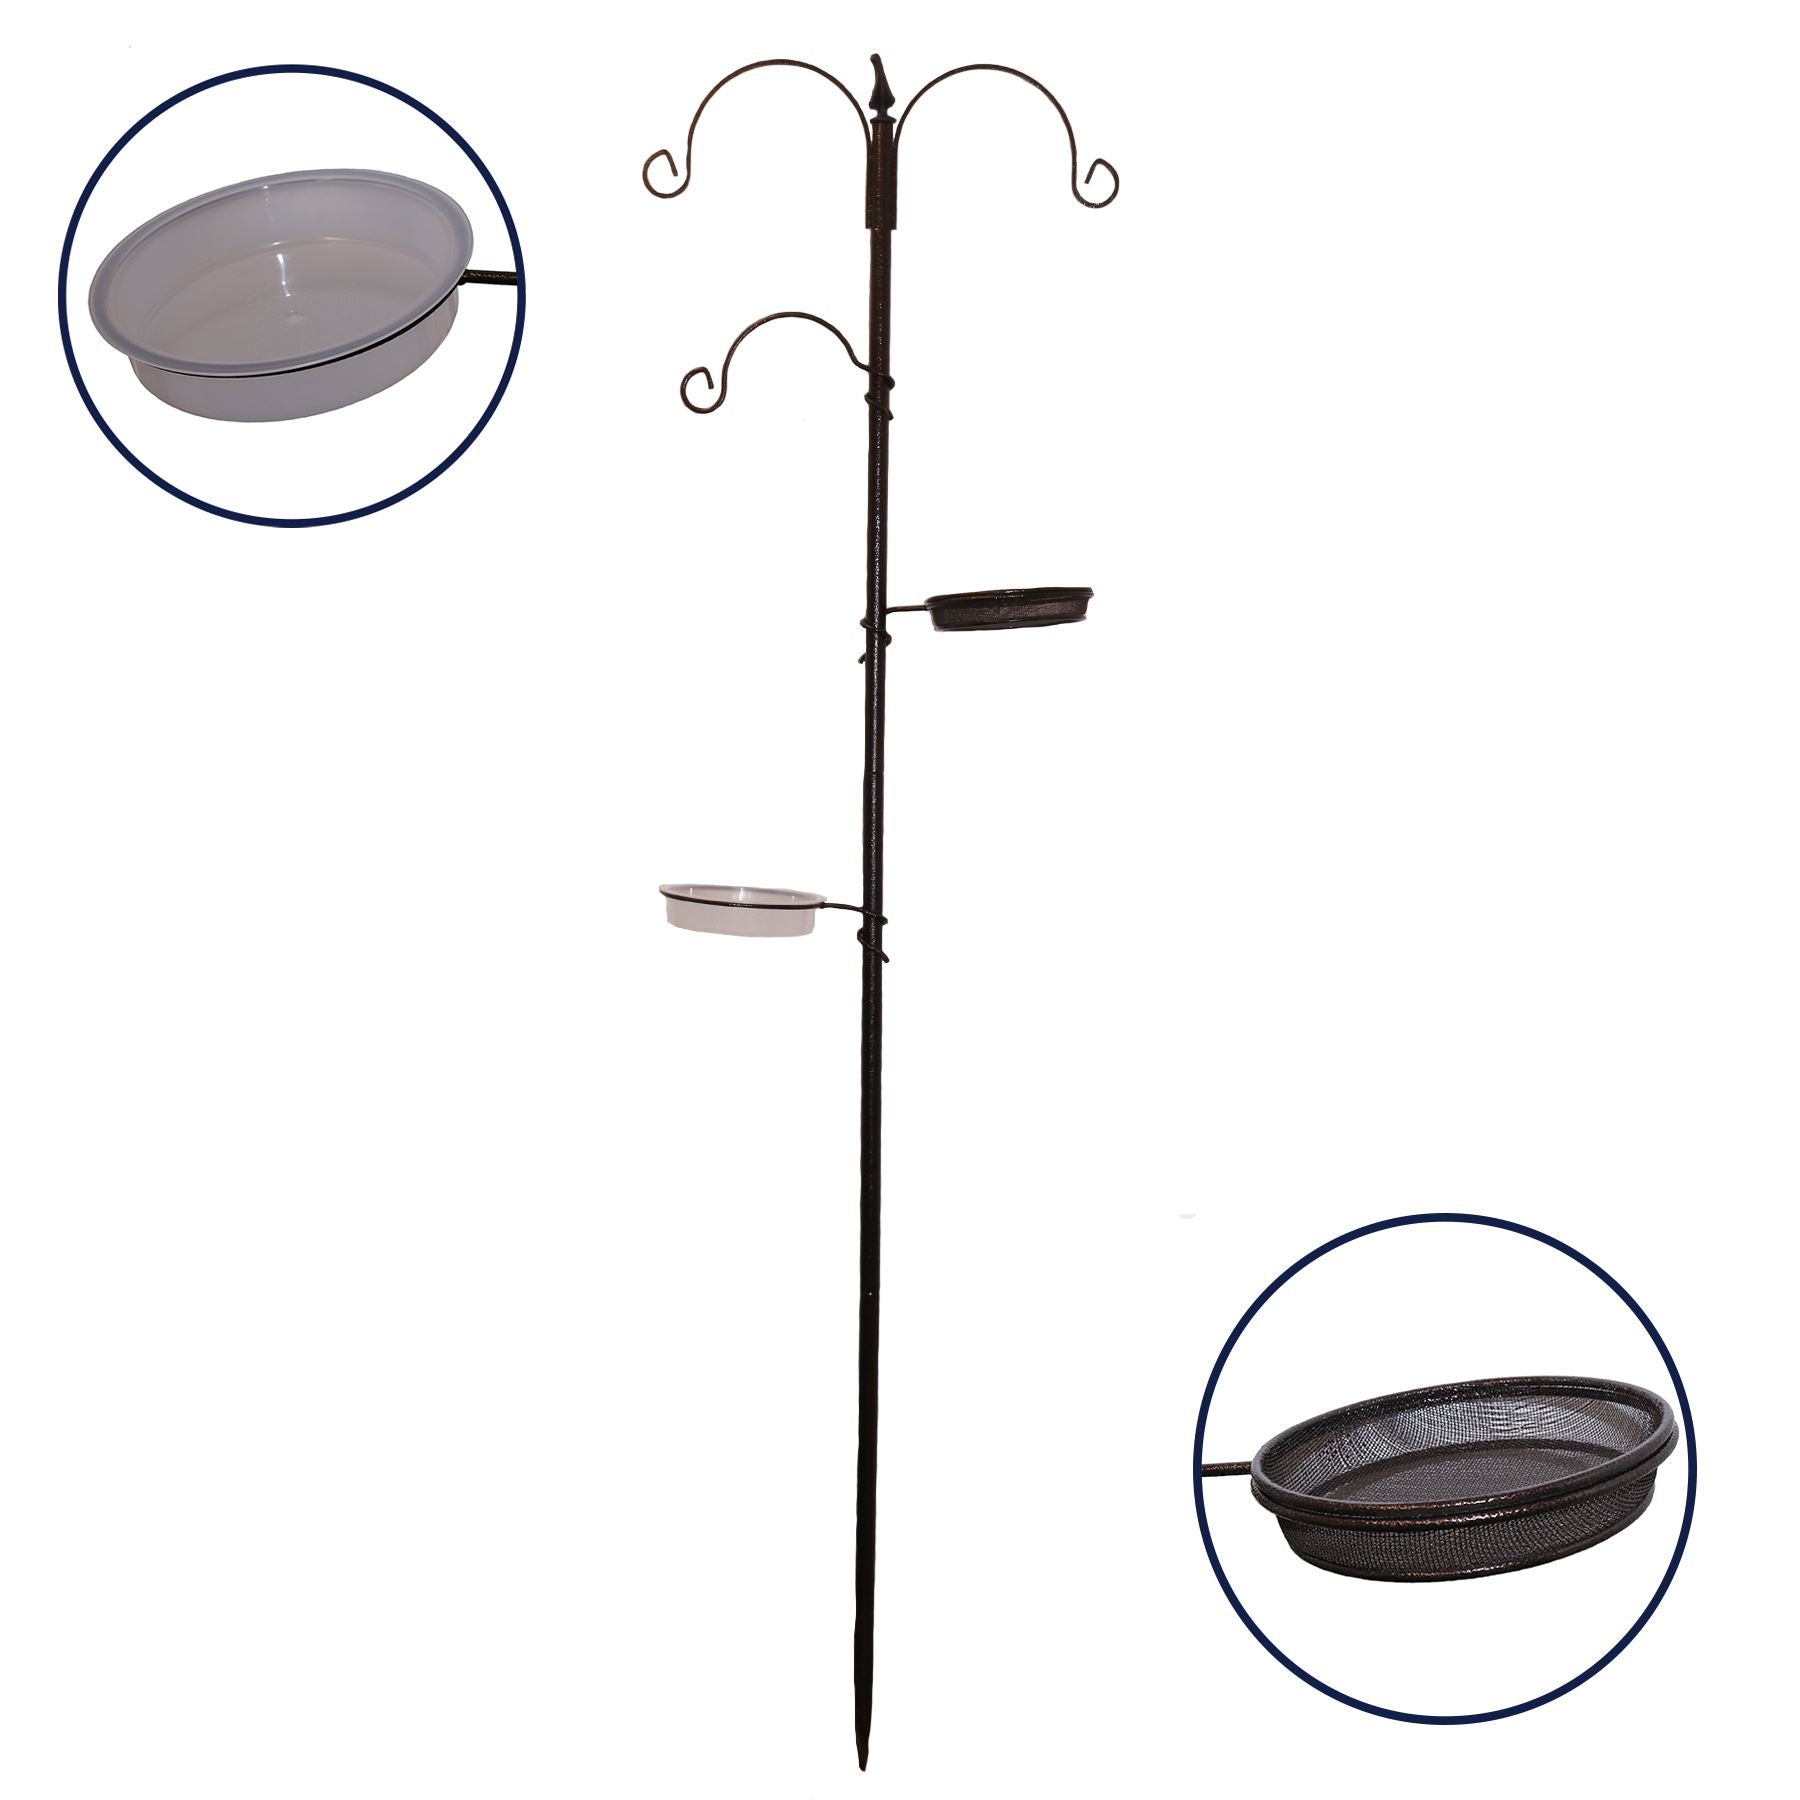 Traditional Wild Bird Feeder Pole Station Food and Water With Four Feeding Areas